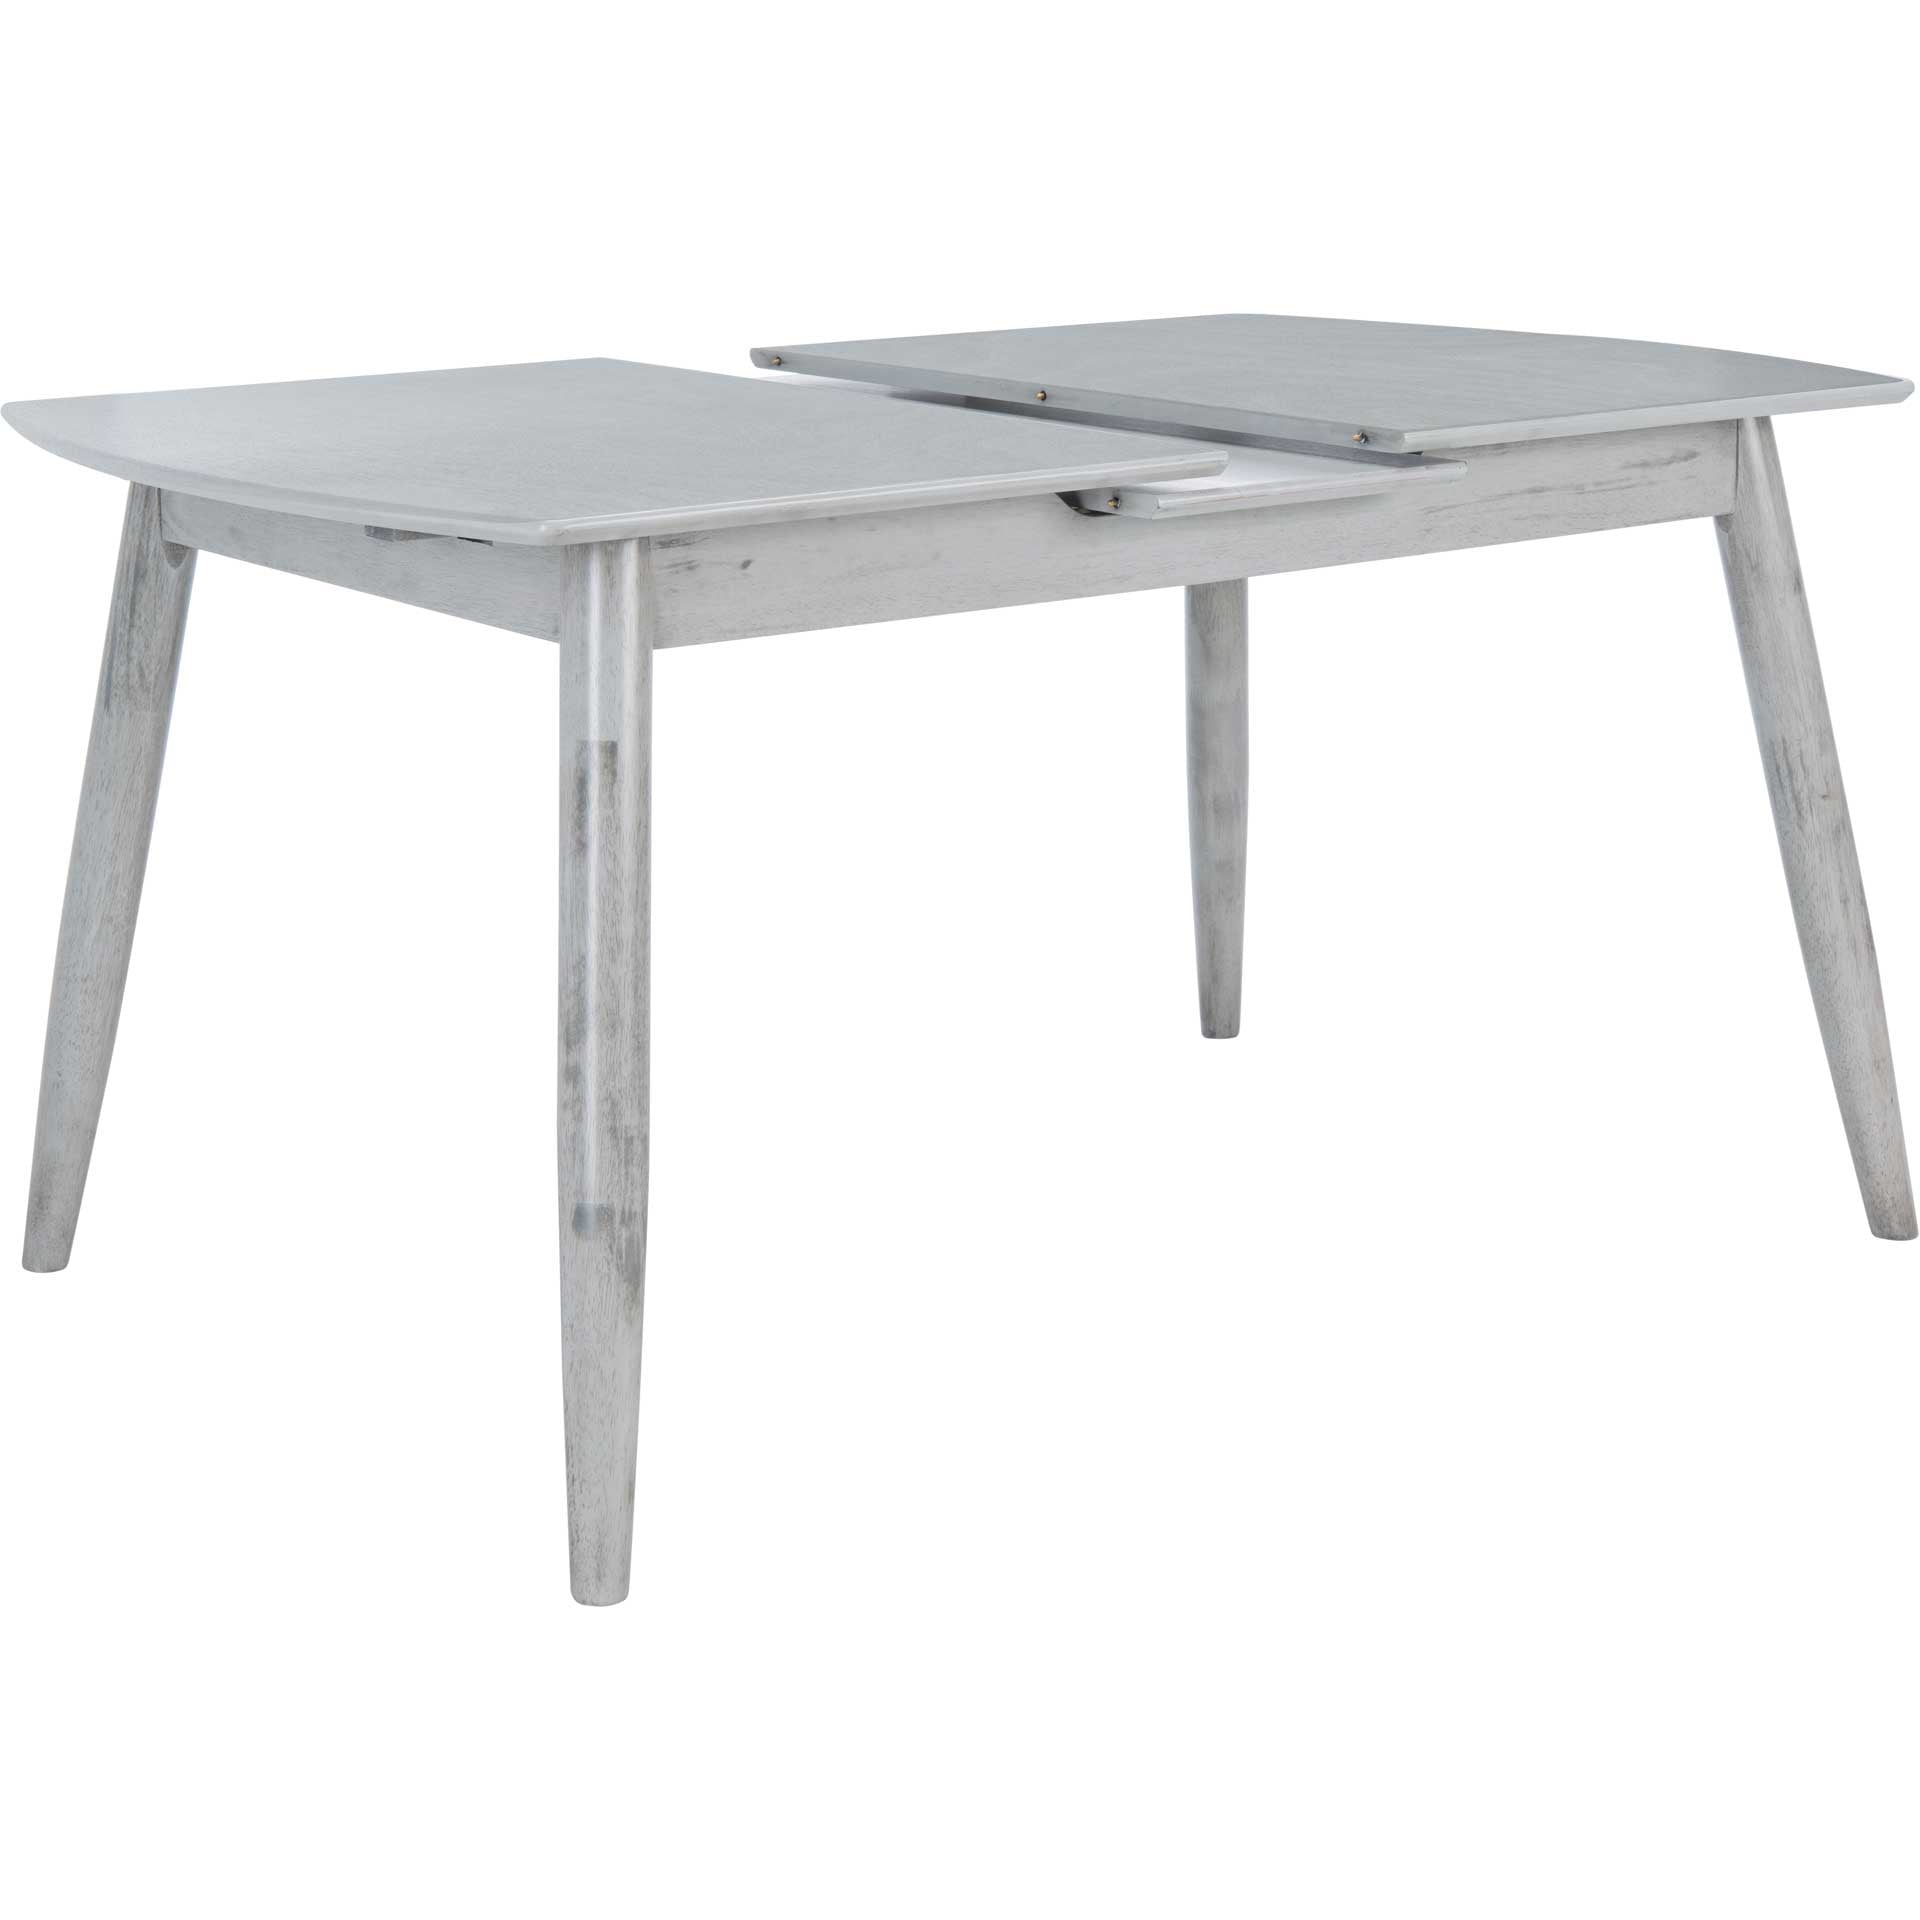 Kylie Auto Mechanism Extension Dining Table Dark Gray